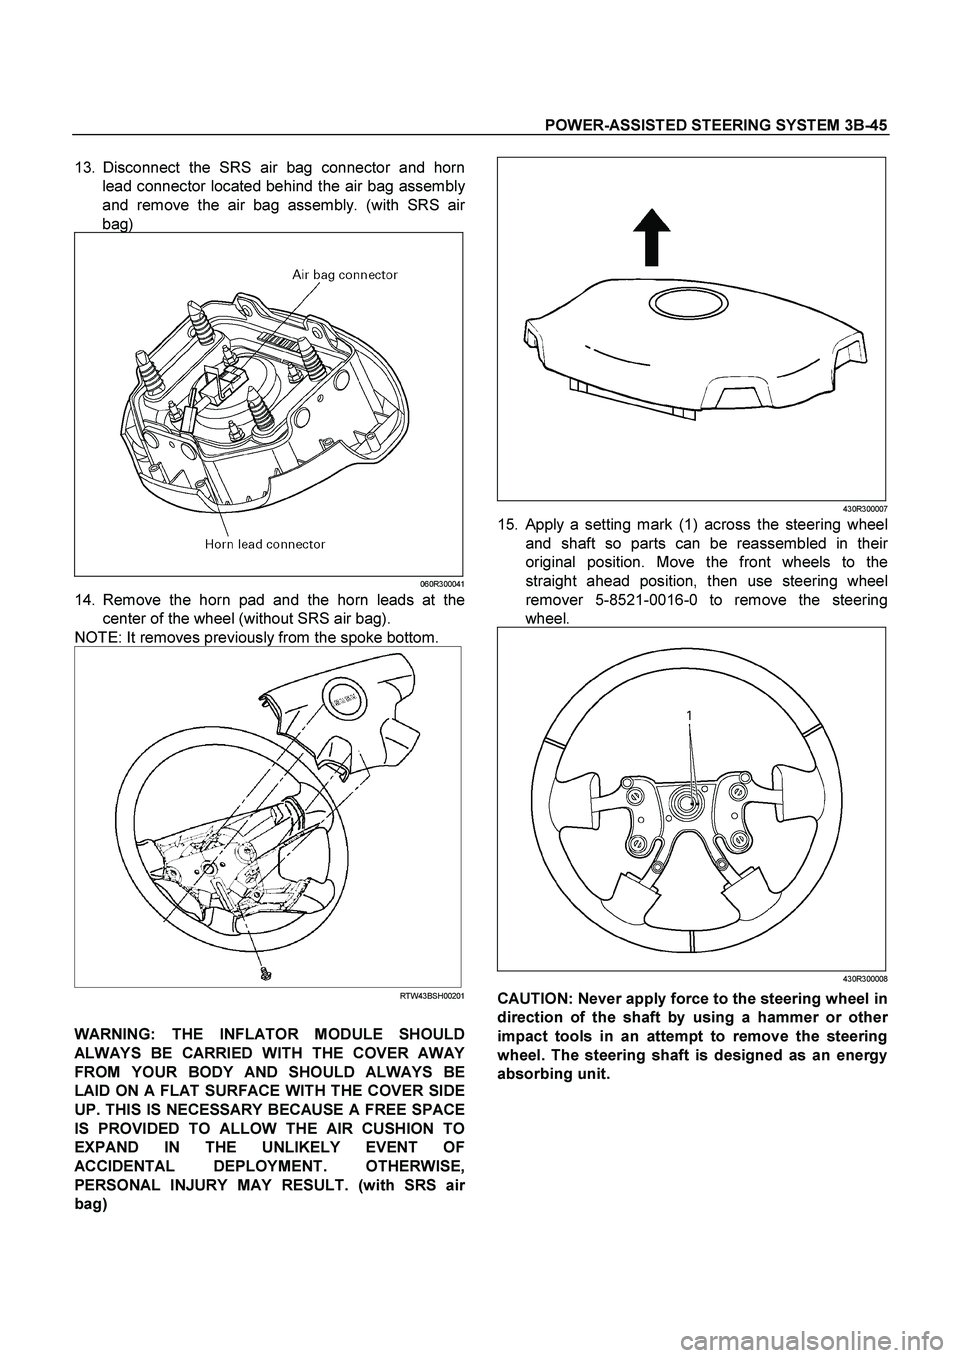 ISUZU TF SERIES 2004  Workshop Manual POWER-ASSISTED STEERING SYSTEM 3B-45
 
13. Disconnect the SRS air bag connector and horn
lead connector located behind the air bag assembl
y
and remove the air bag assembly. (with SRS air
bag) 
060R30